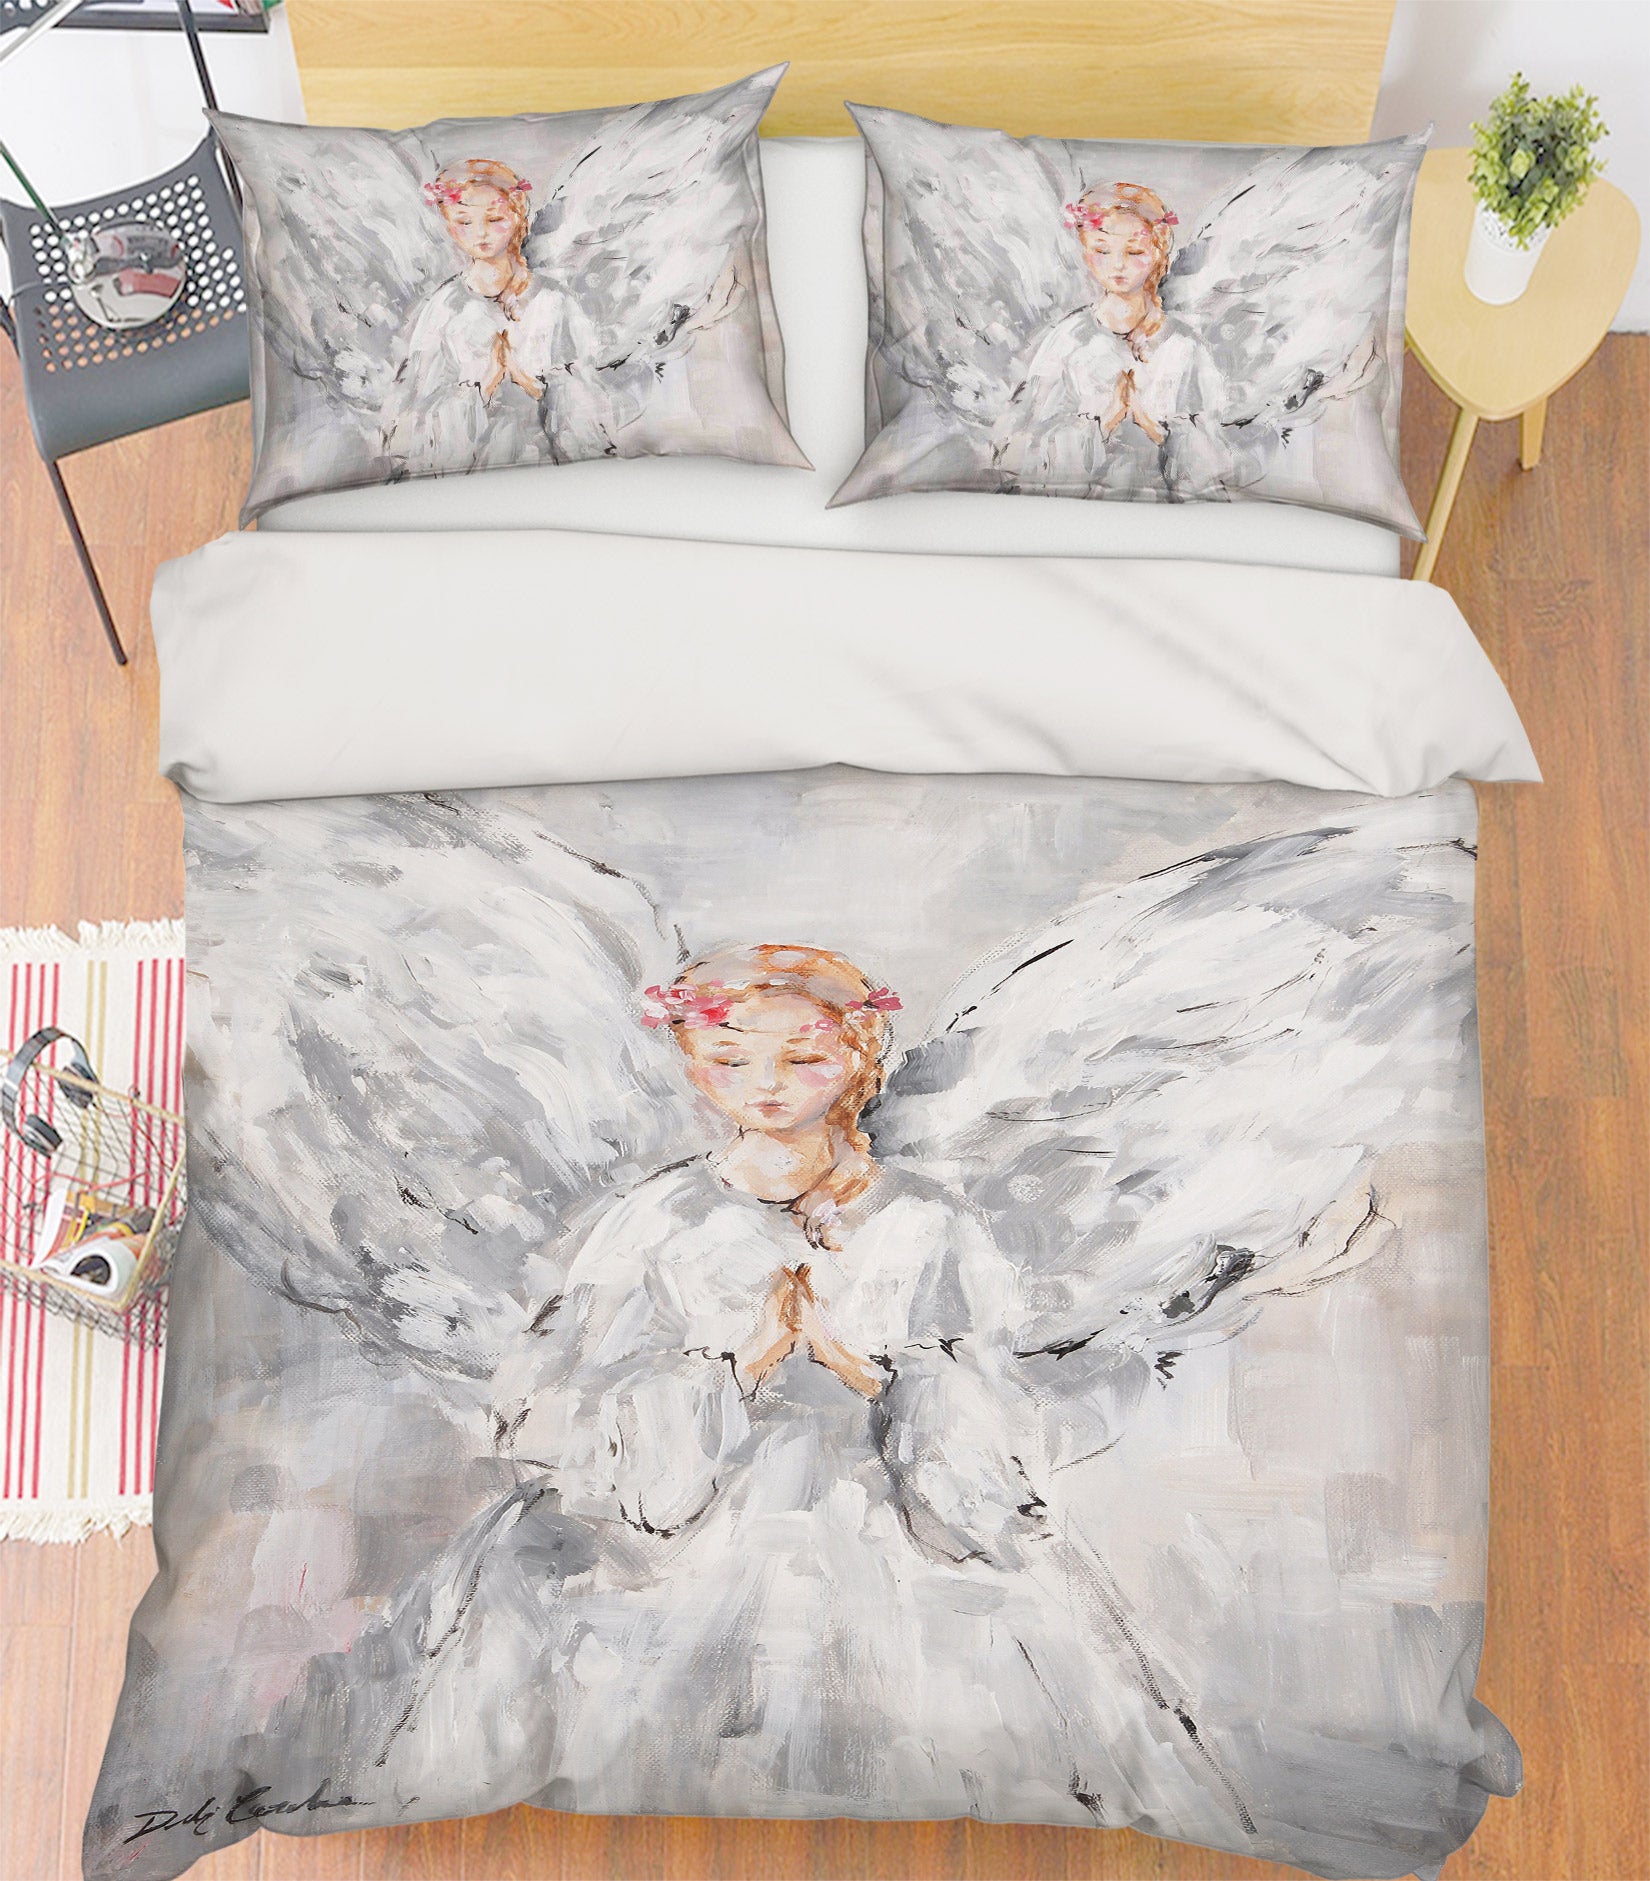 3D Angel Girl Wreath 2099 Debi Coules Bedding Bed Pillowcases Quilt